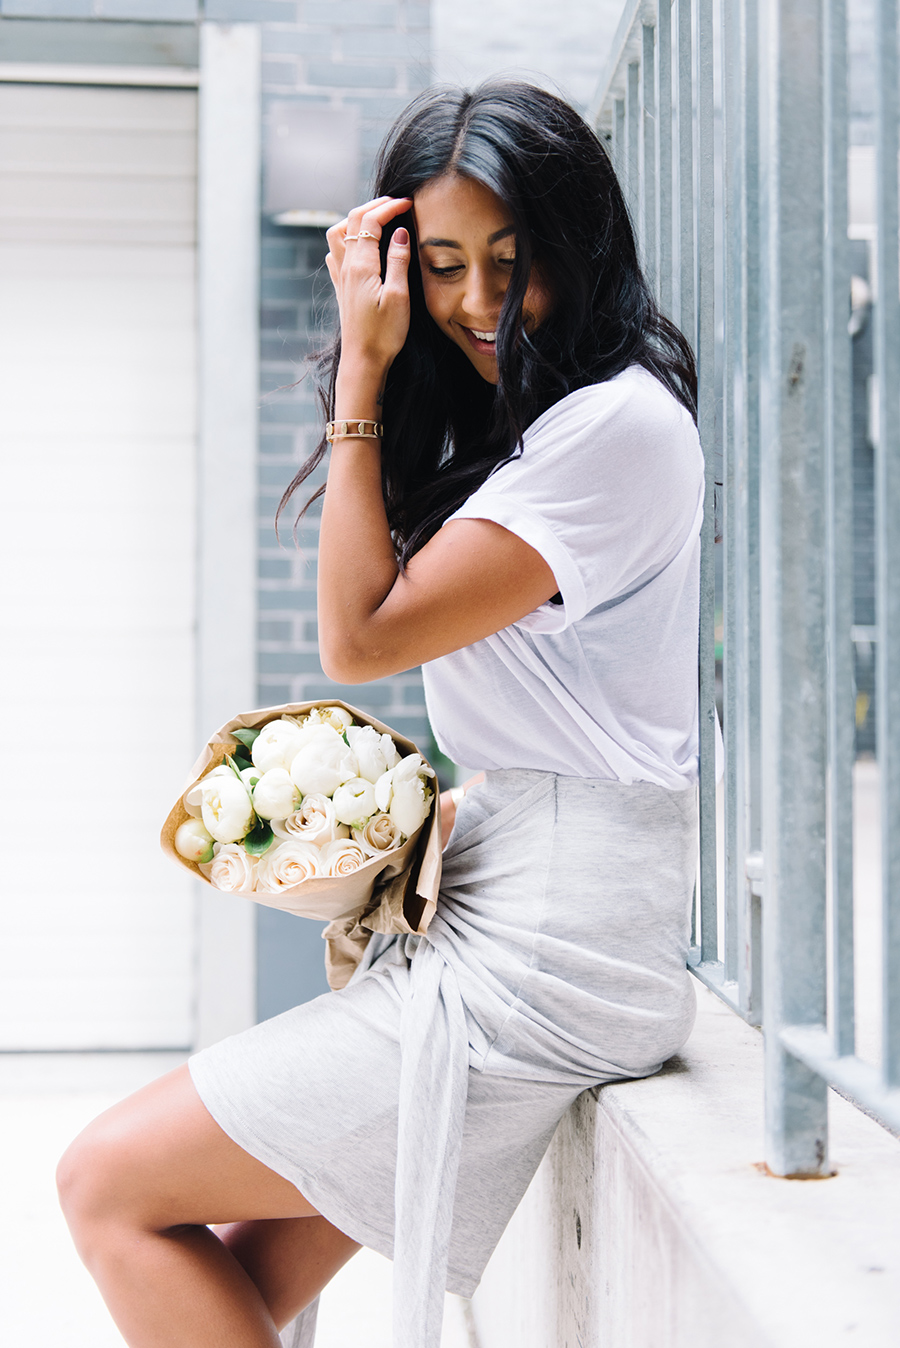 the fifth discovery skirt white isabel marant sneakers roses peonies bouquet flowers white pretty model outfit style inspiration streetdstyle not your standard blog kayla seah